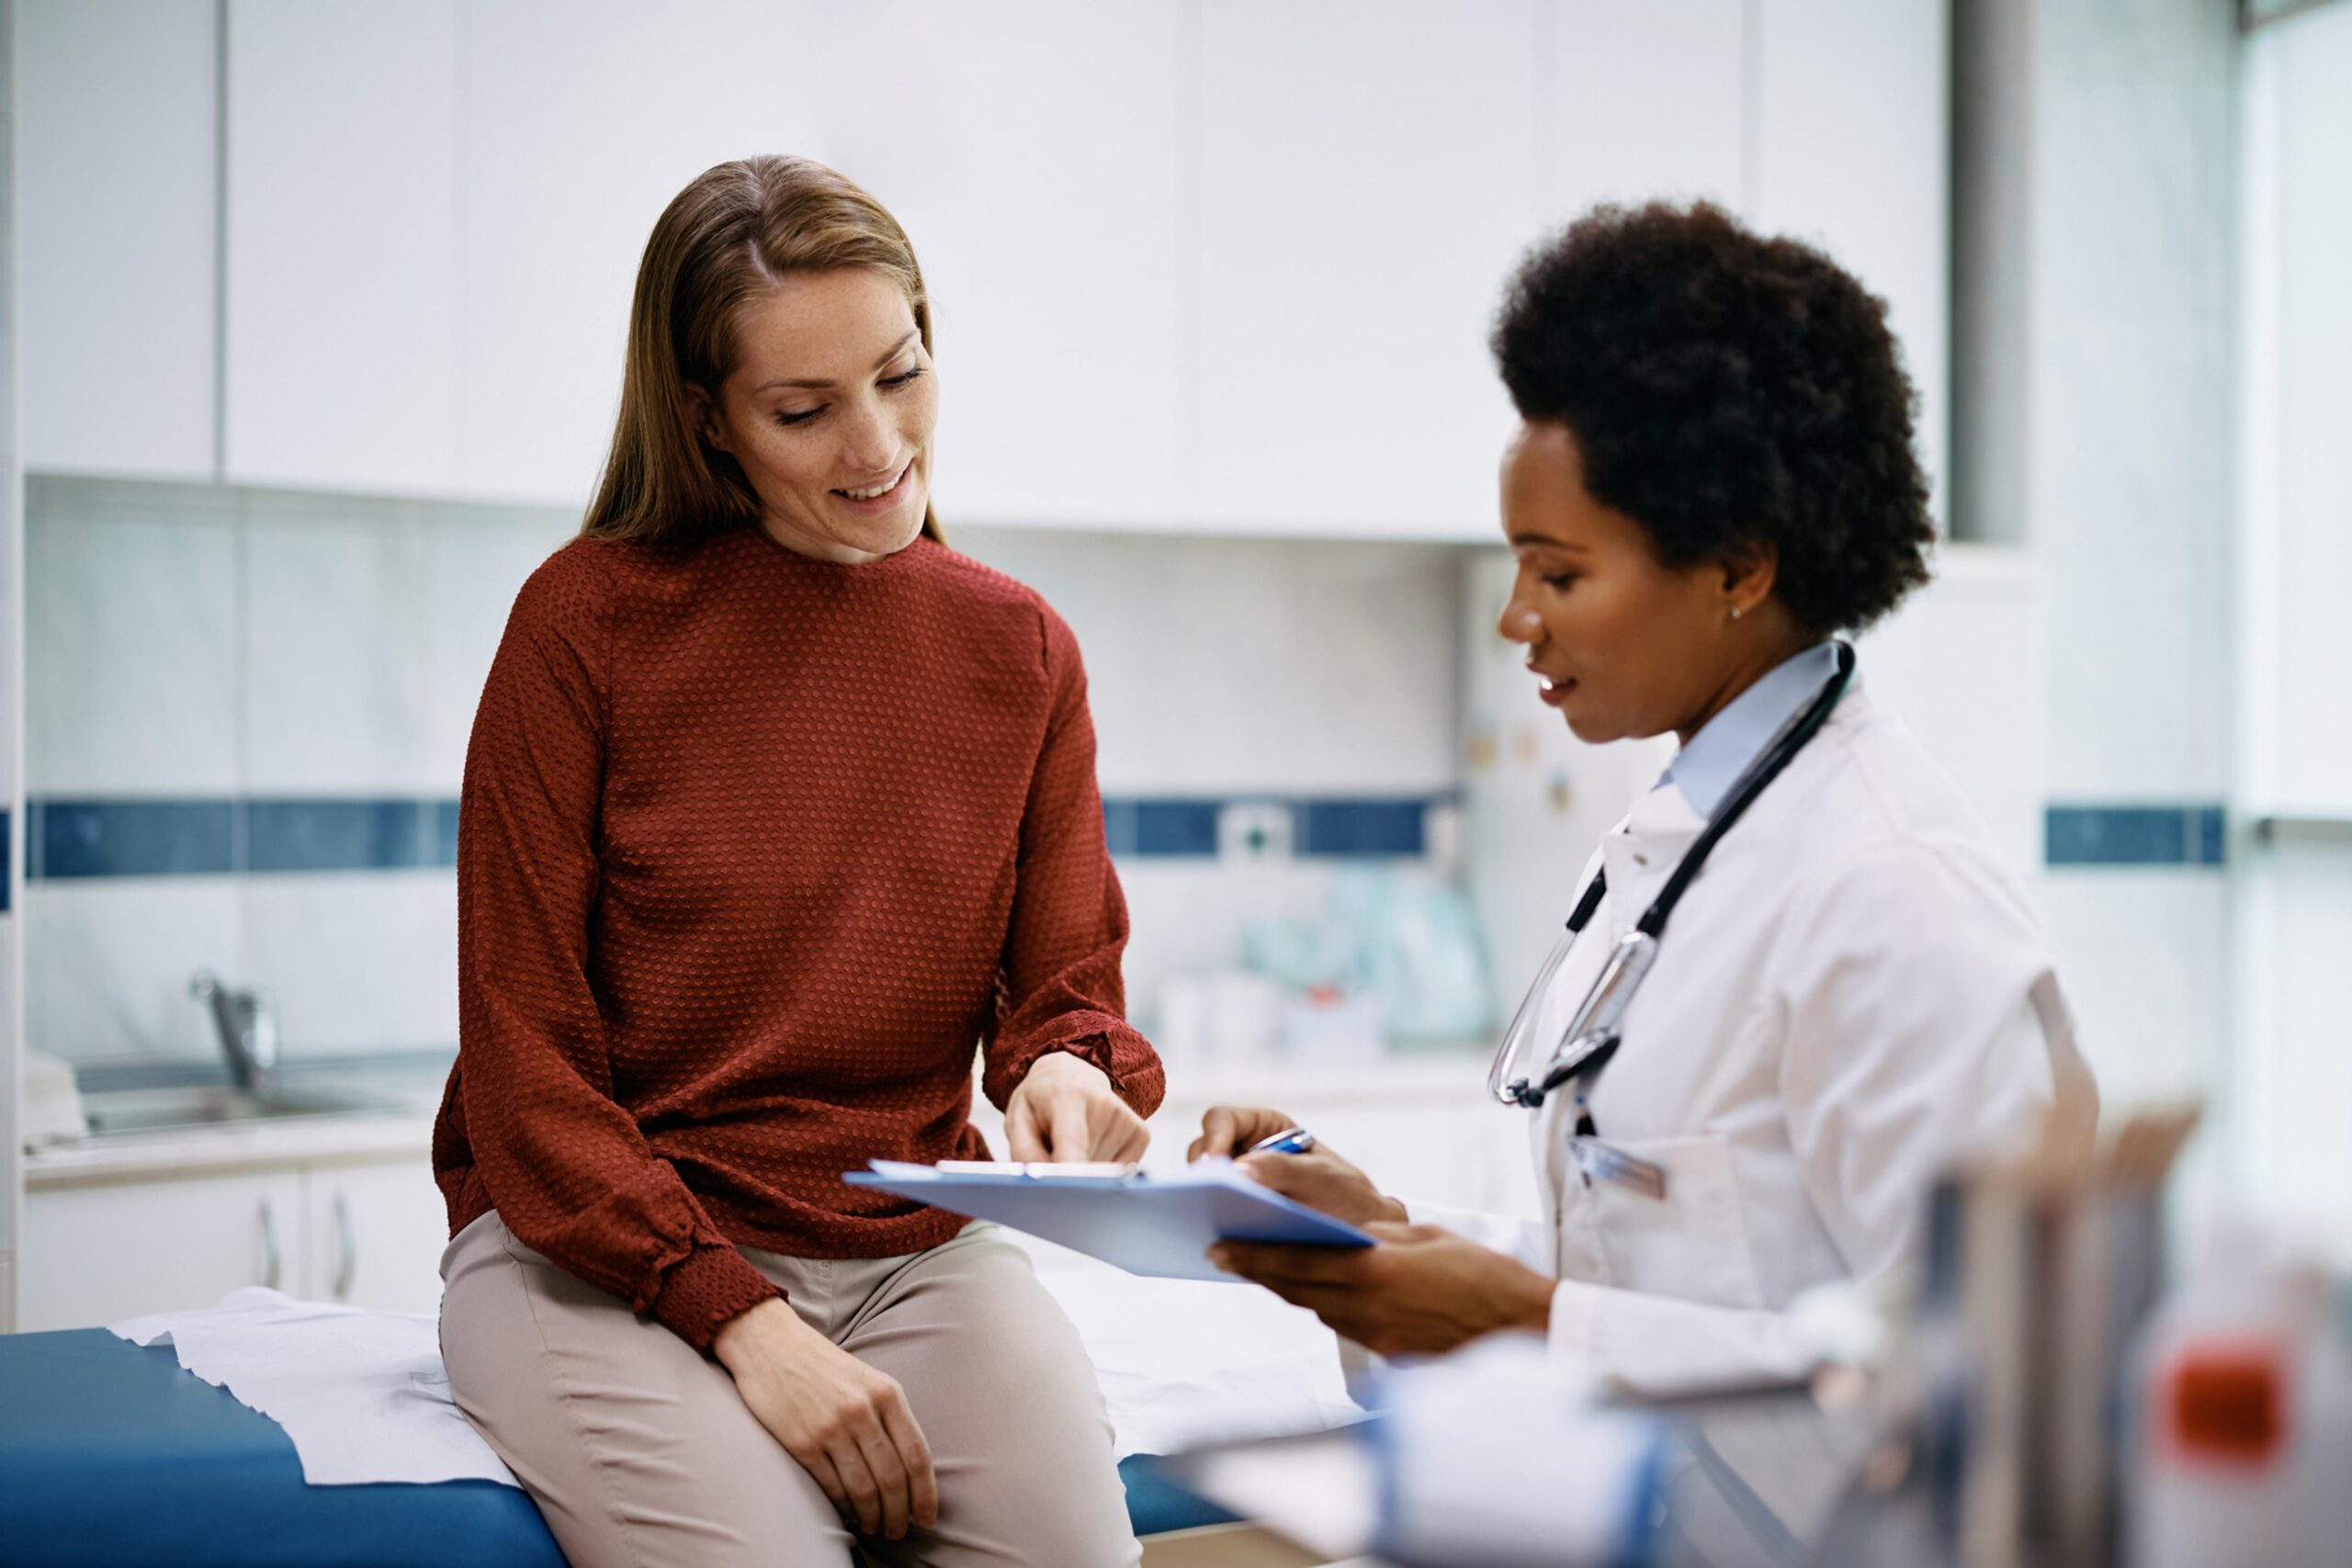 Discussing mental health with your Primary Care Provider